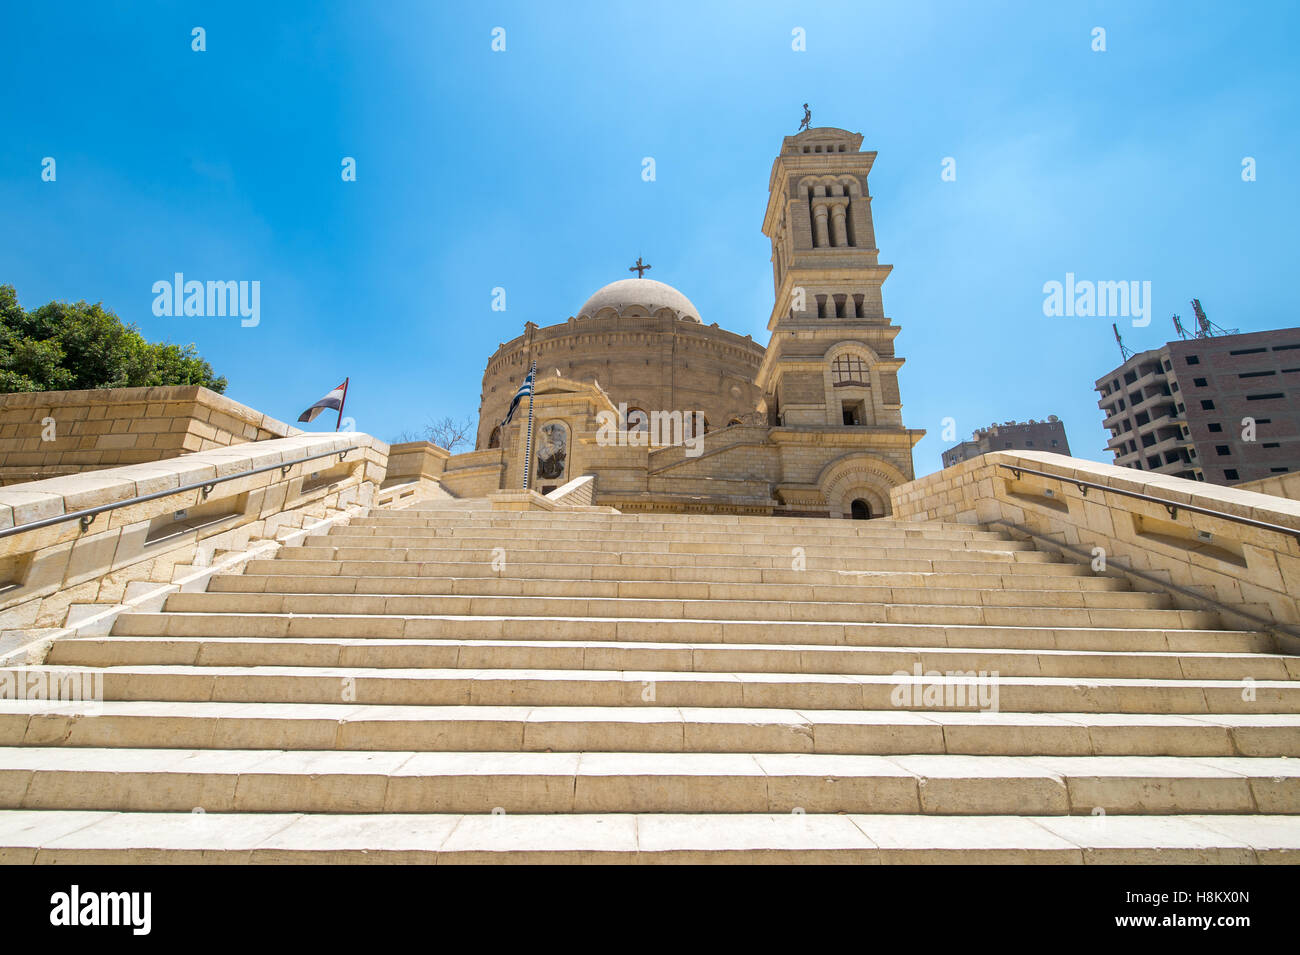 Cairo, Egypt. Steps leading up to the Greek Orthodox church and Monastery of St. George (Mari Girgis) in the Coptic Quarter of C Stock Photo